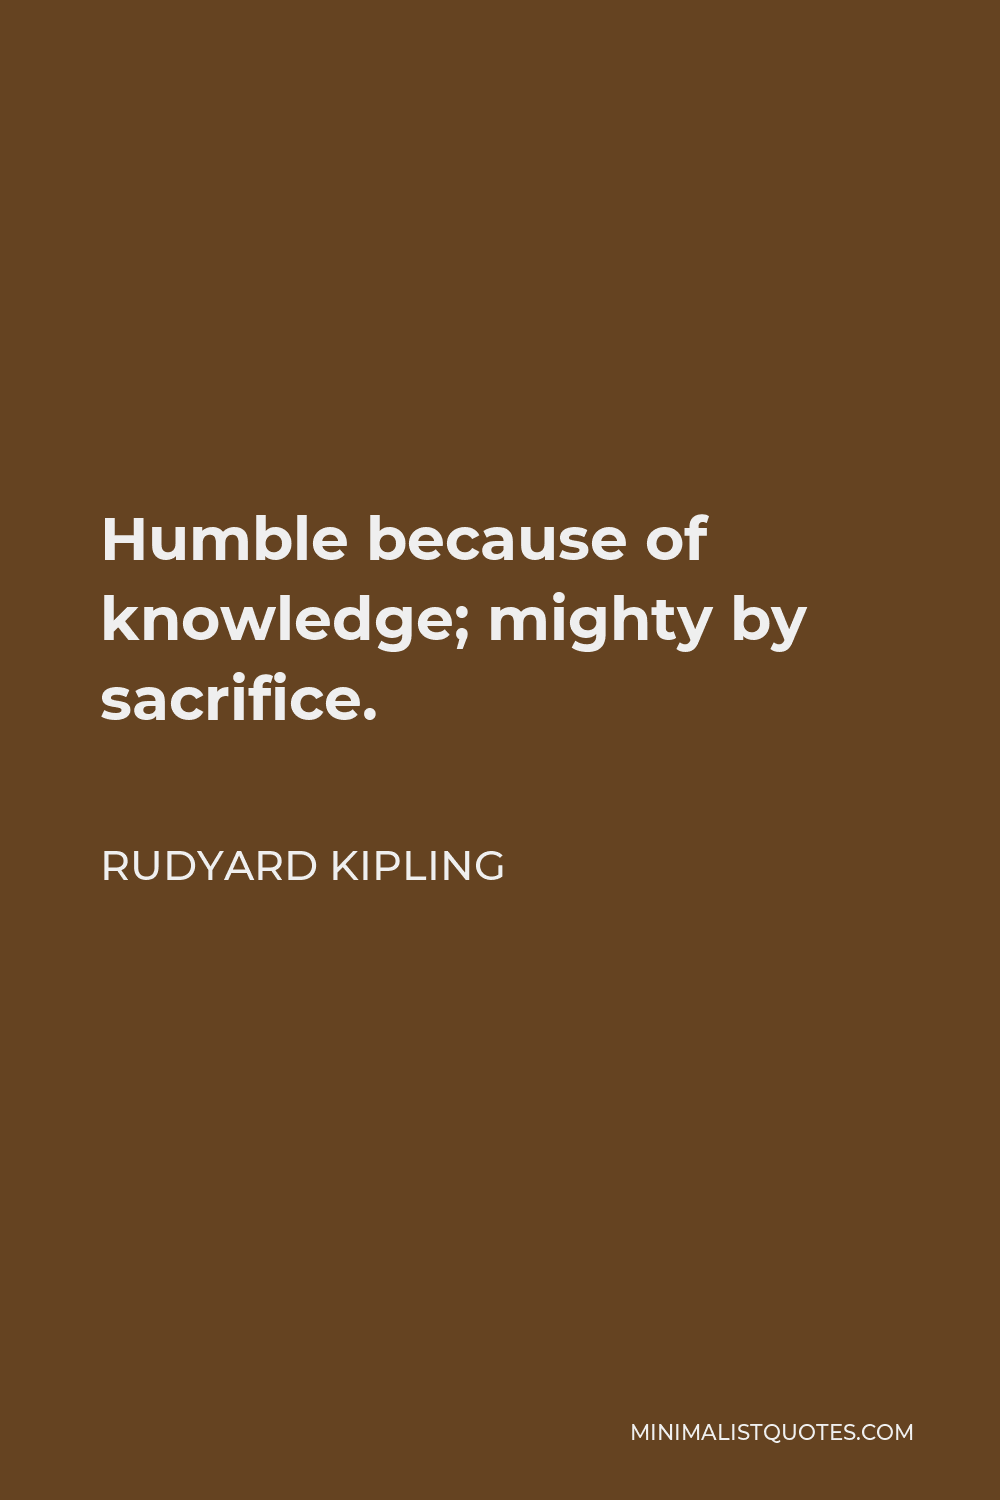 Rudyard Kipling Quote - Humble because of knowledge; mighty by sacrifice.